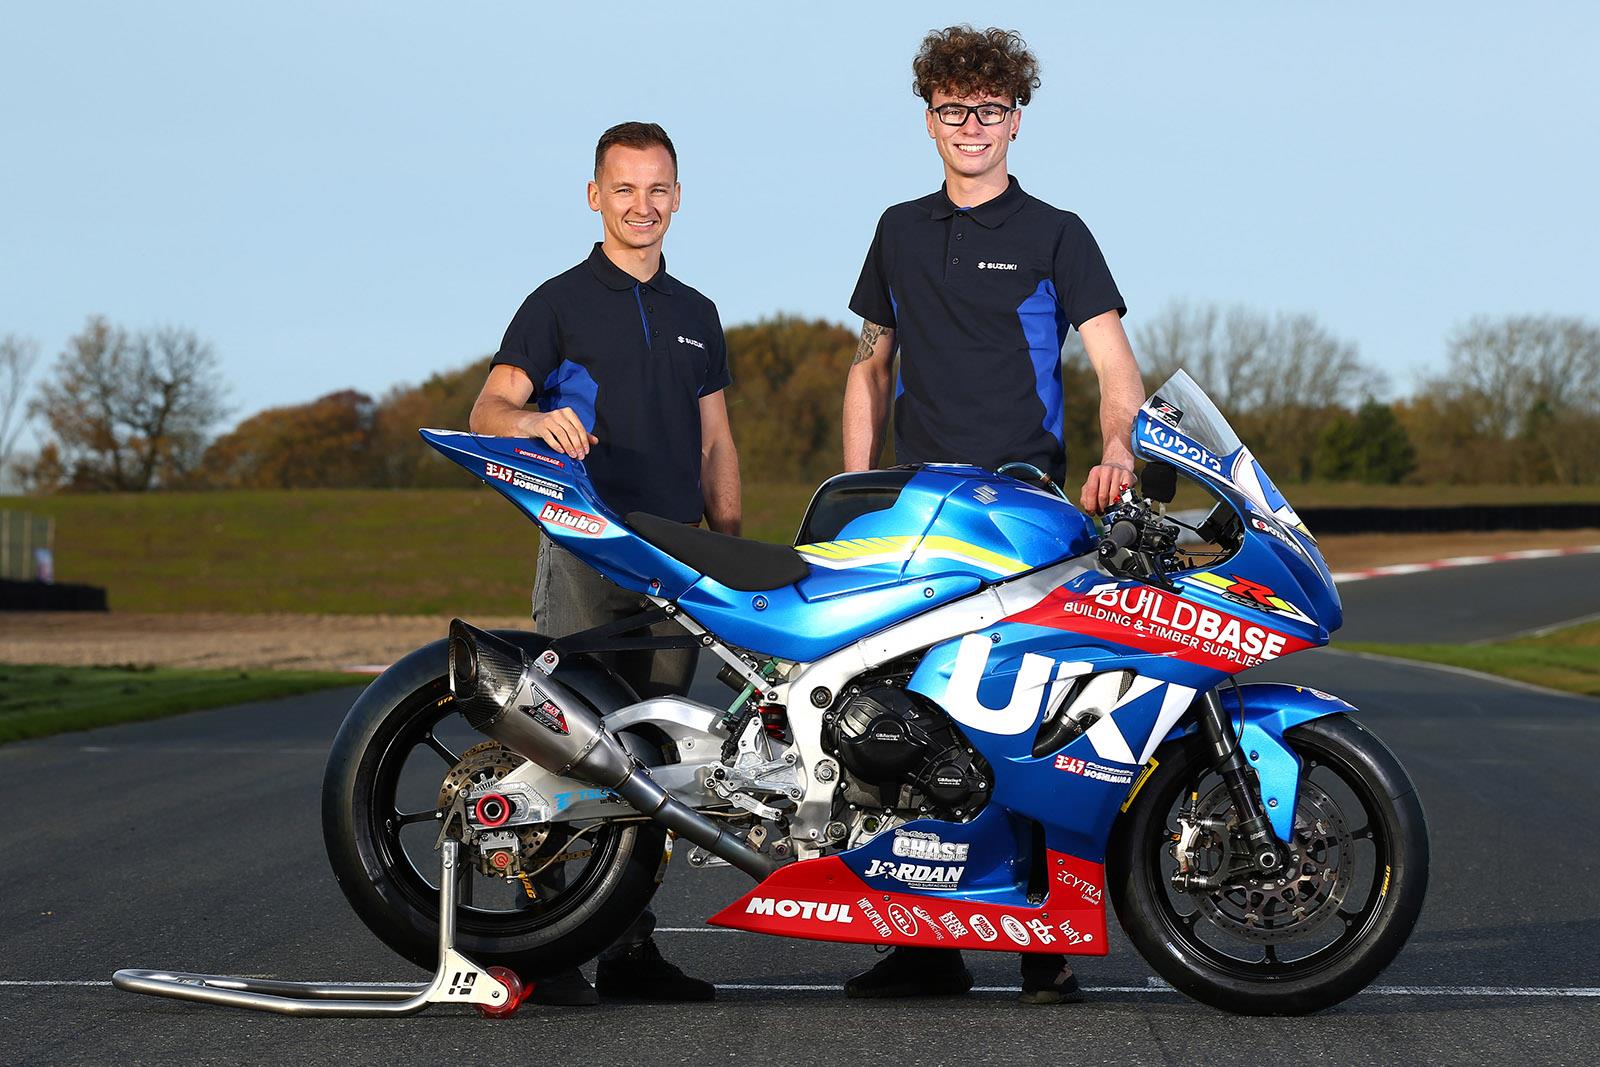 Bsb Ray And Cooper Head Up Official Suzuki Effort Mcn